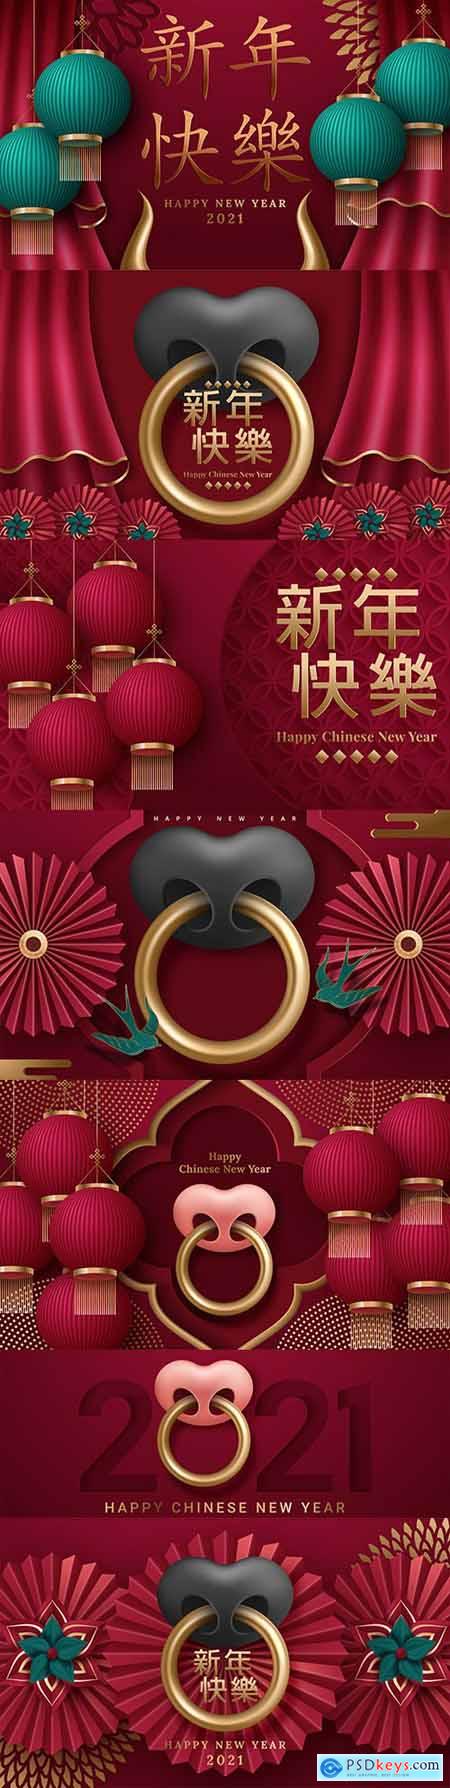 Happy Chinese New Year flower and lantern decorative design 2